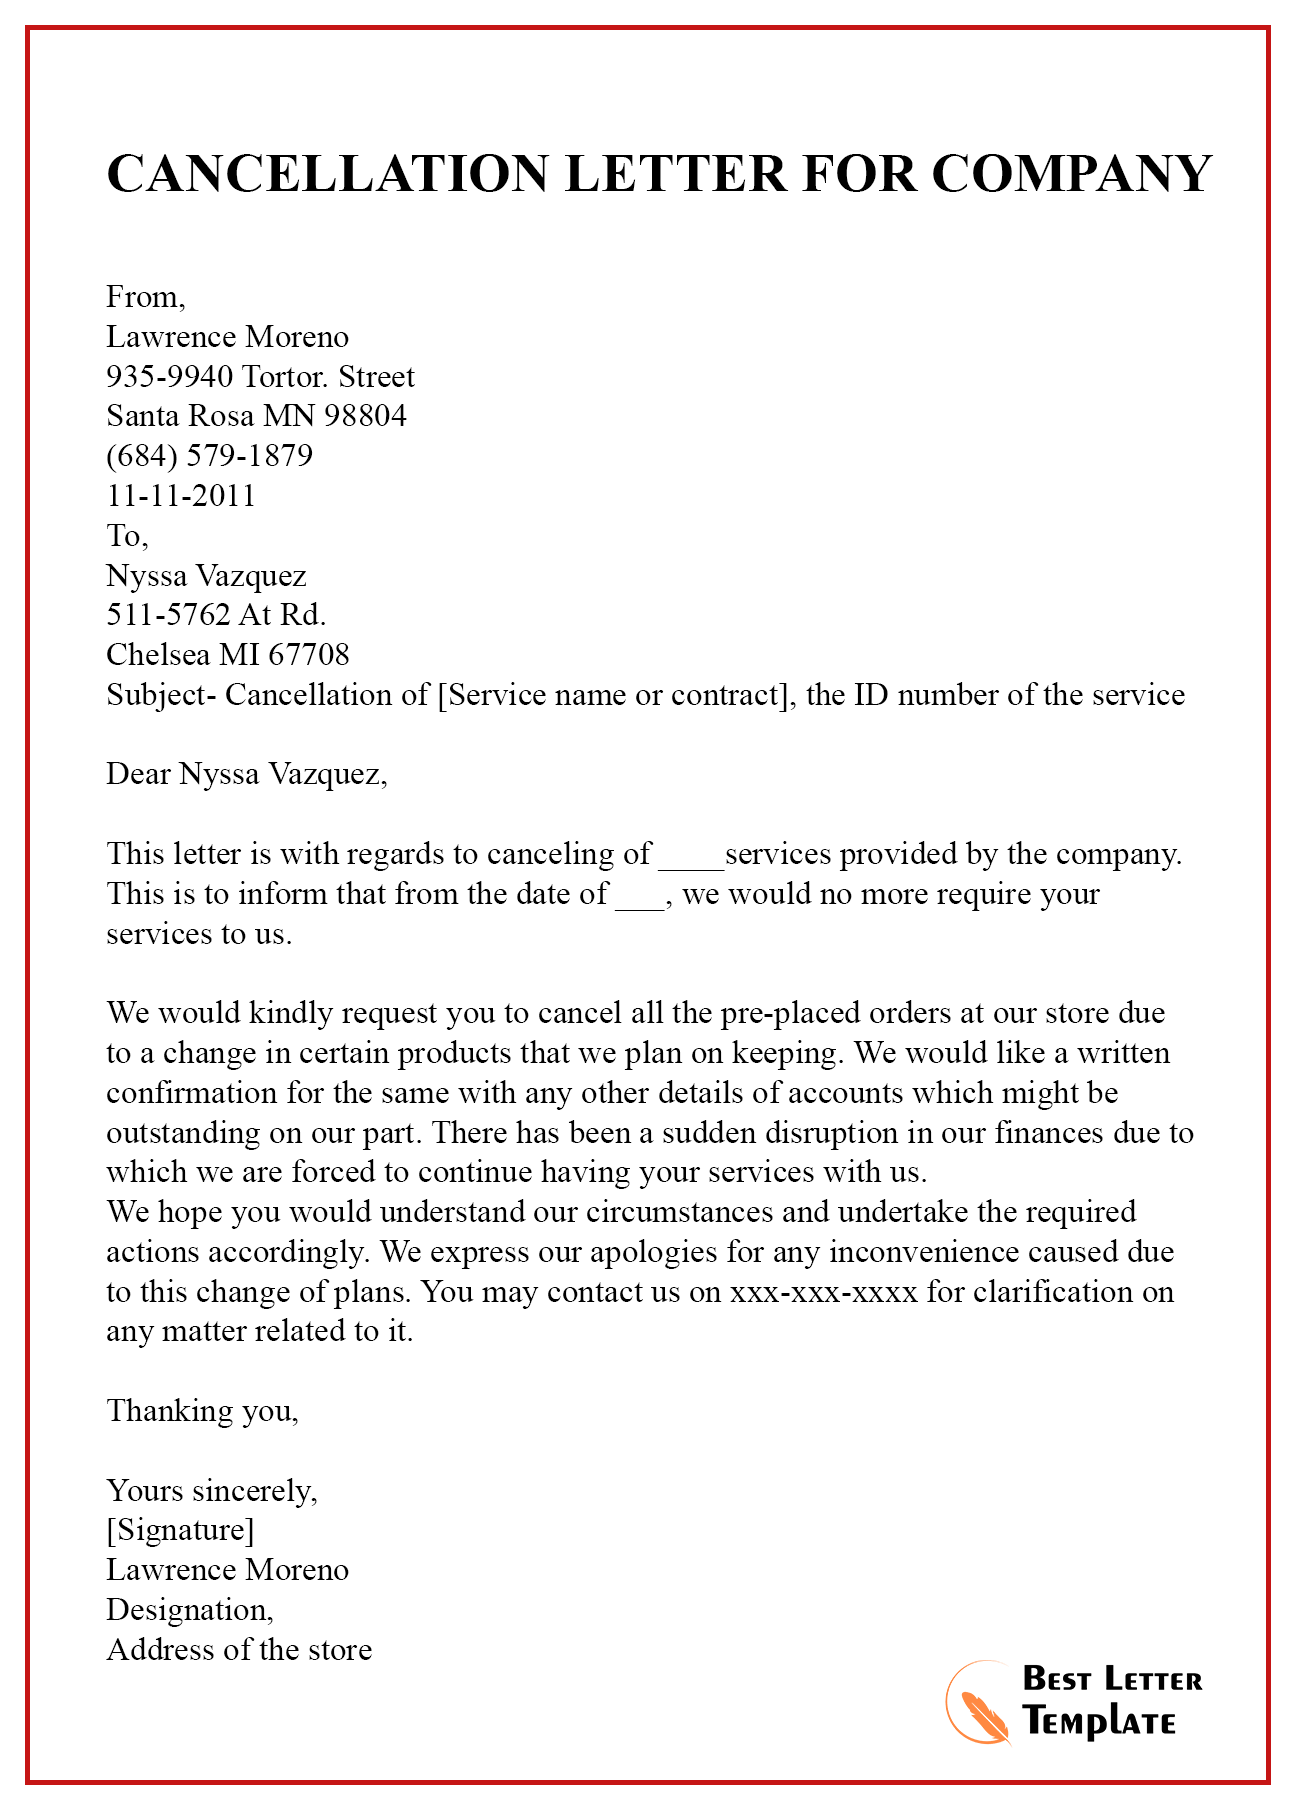 10+ Cancellation Letter Template - Format, Sample & Example (2022)